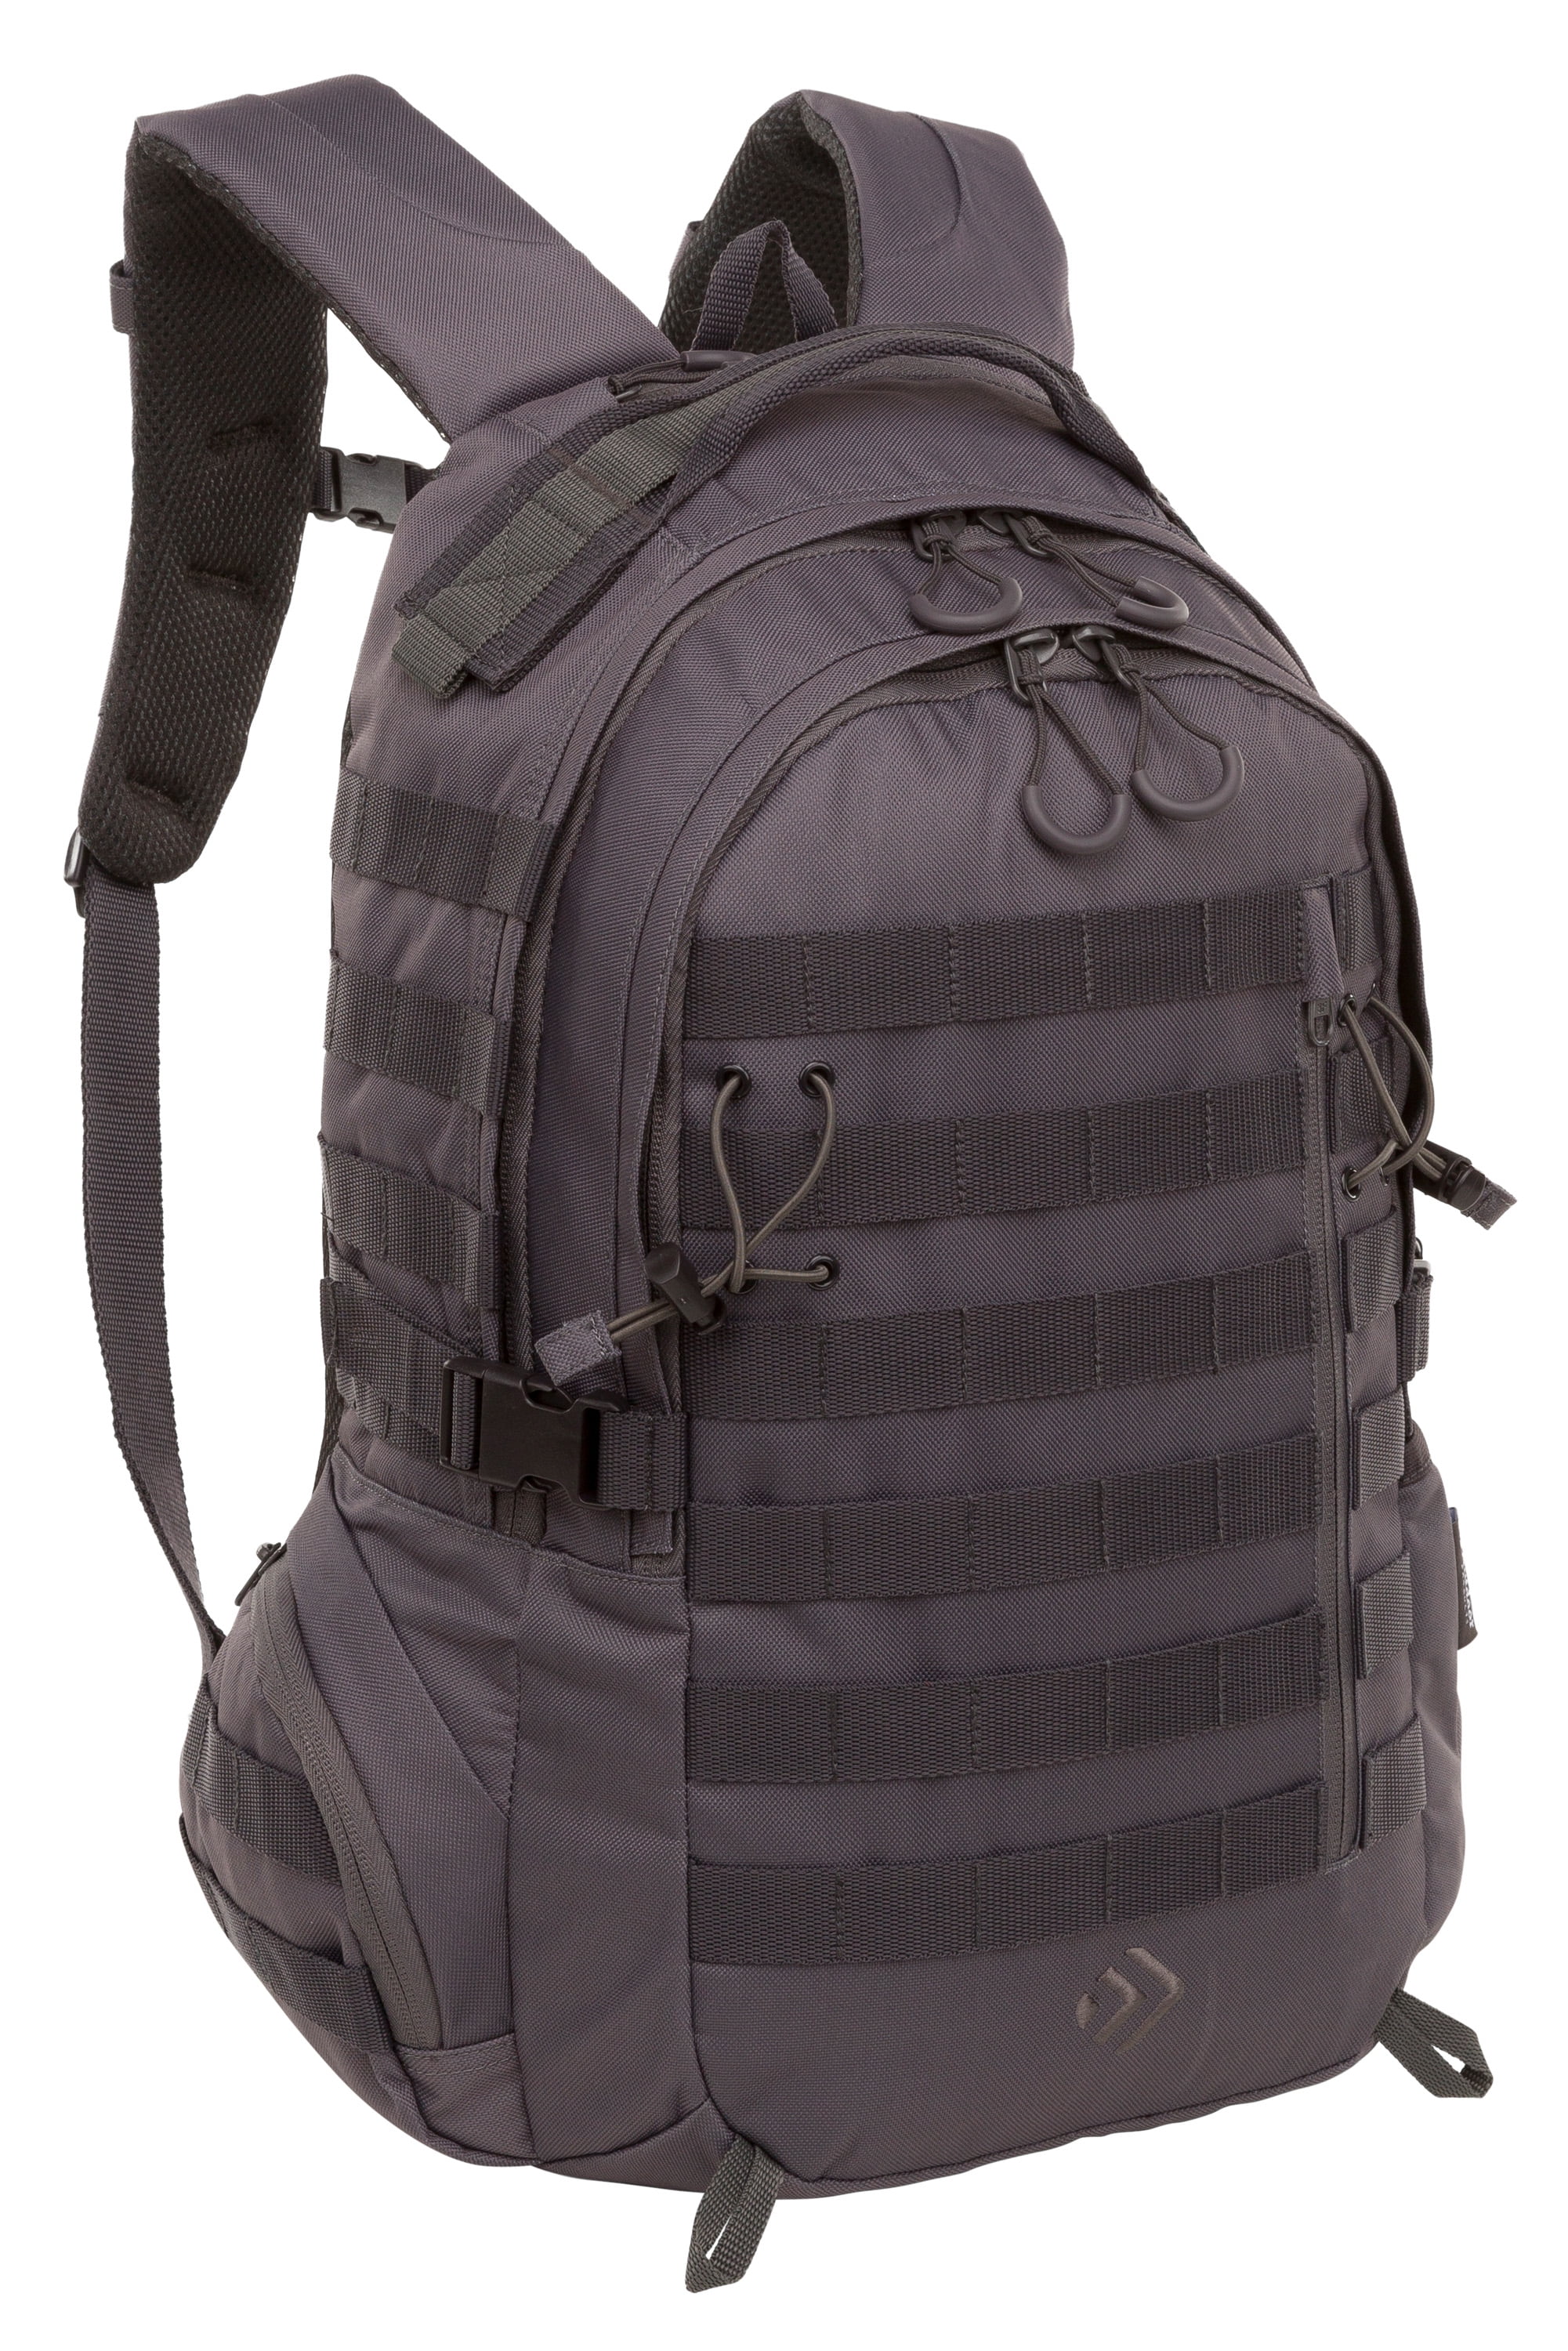 Outdoor Products Quest 29 L Backpack, Gray, Adult, Teen, Polyester